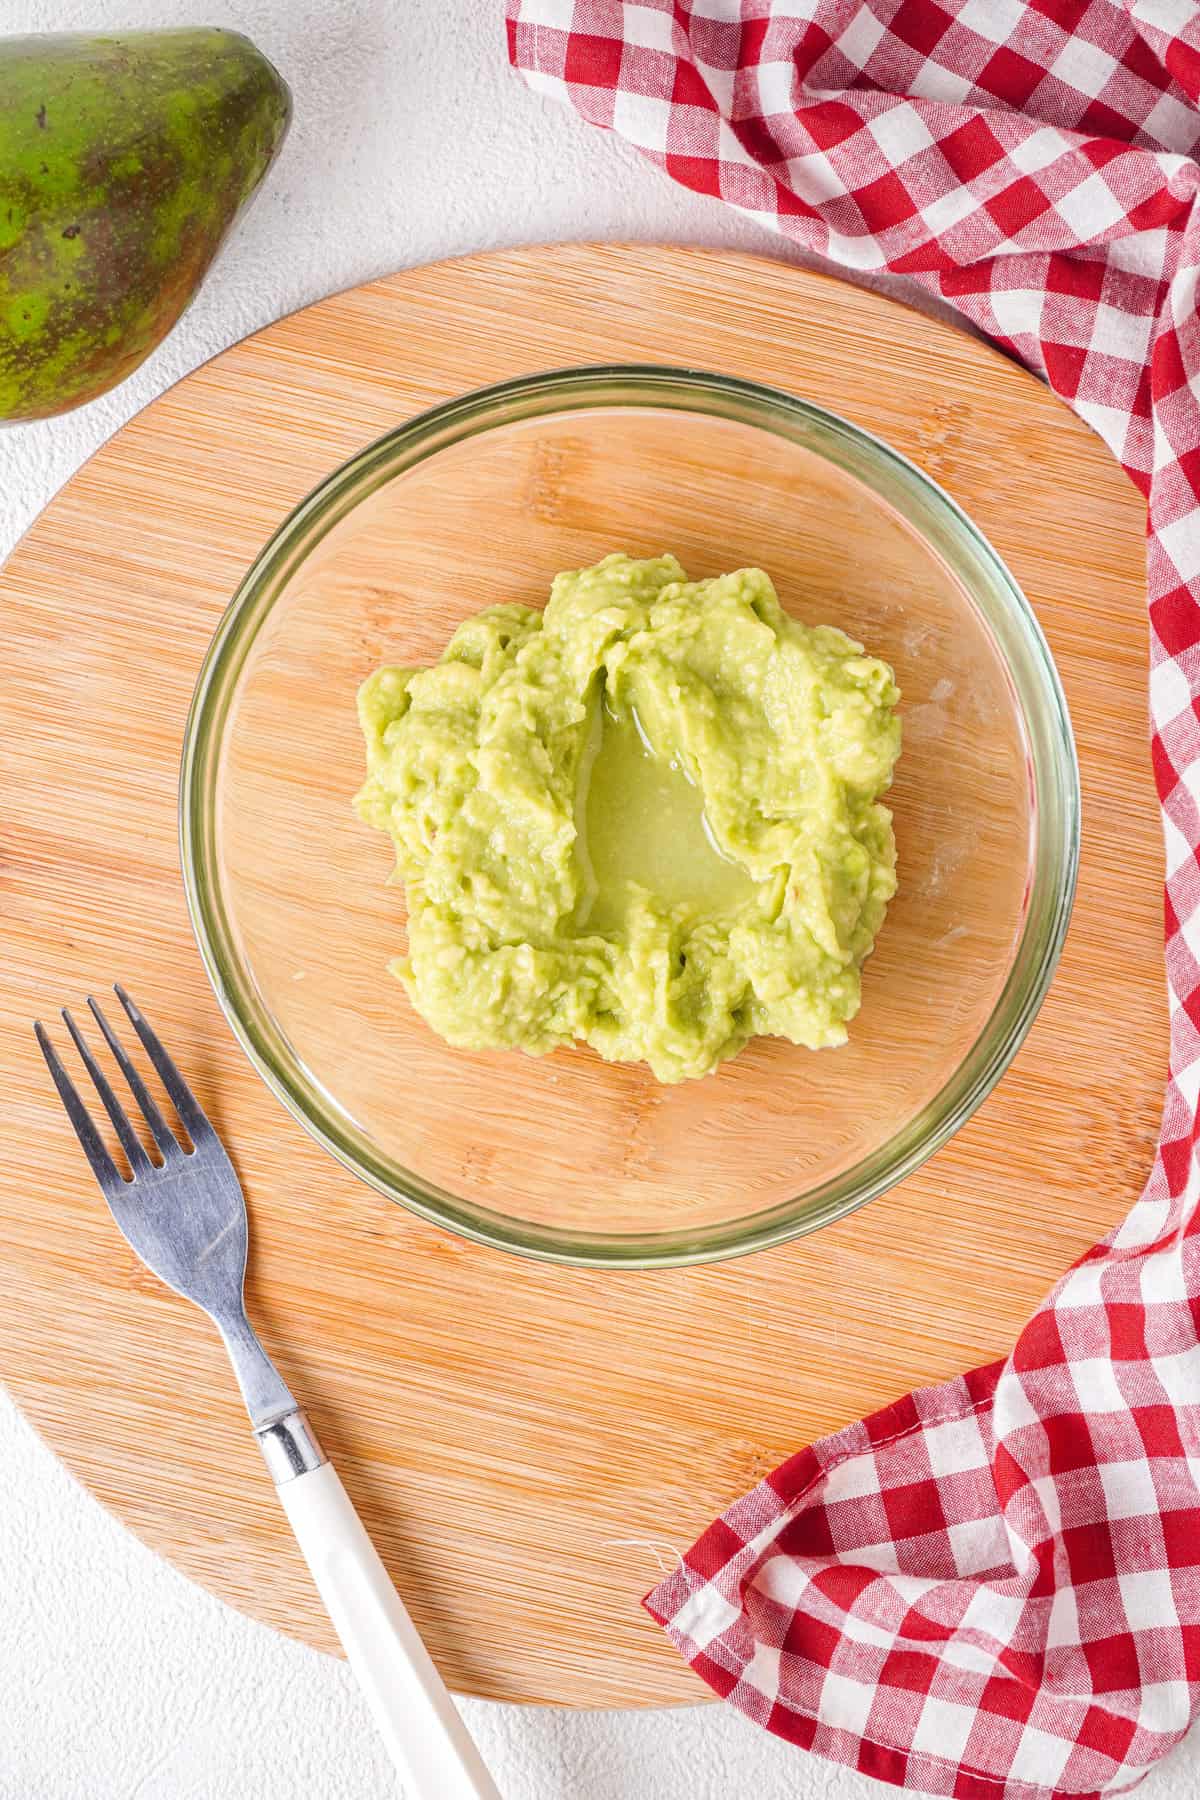 Overhead view of mashed avocados with lemon juice added